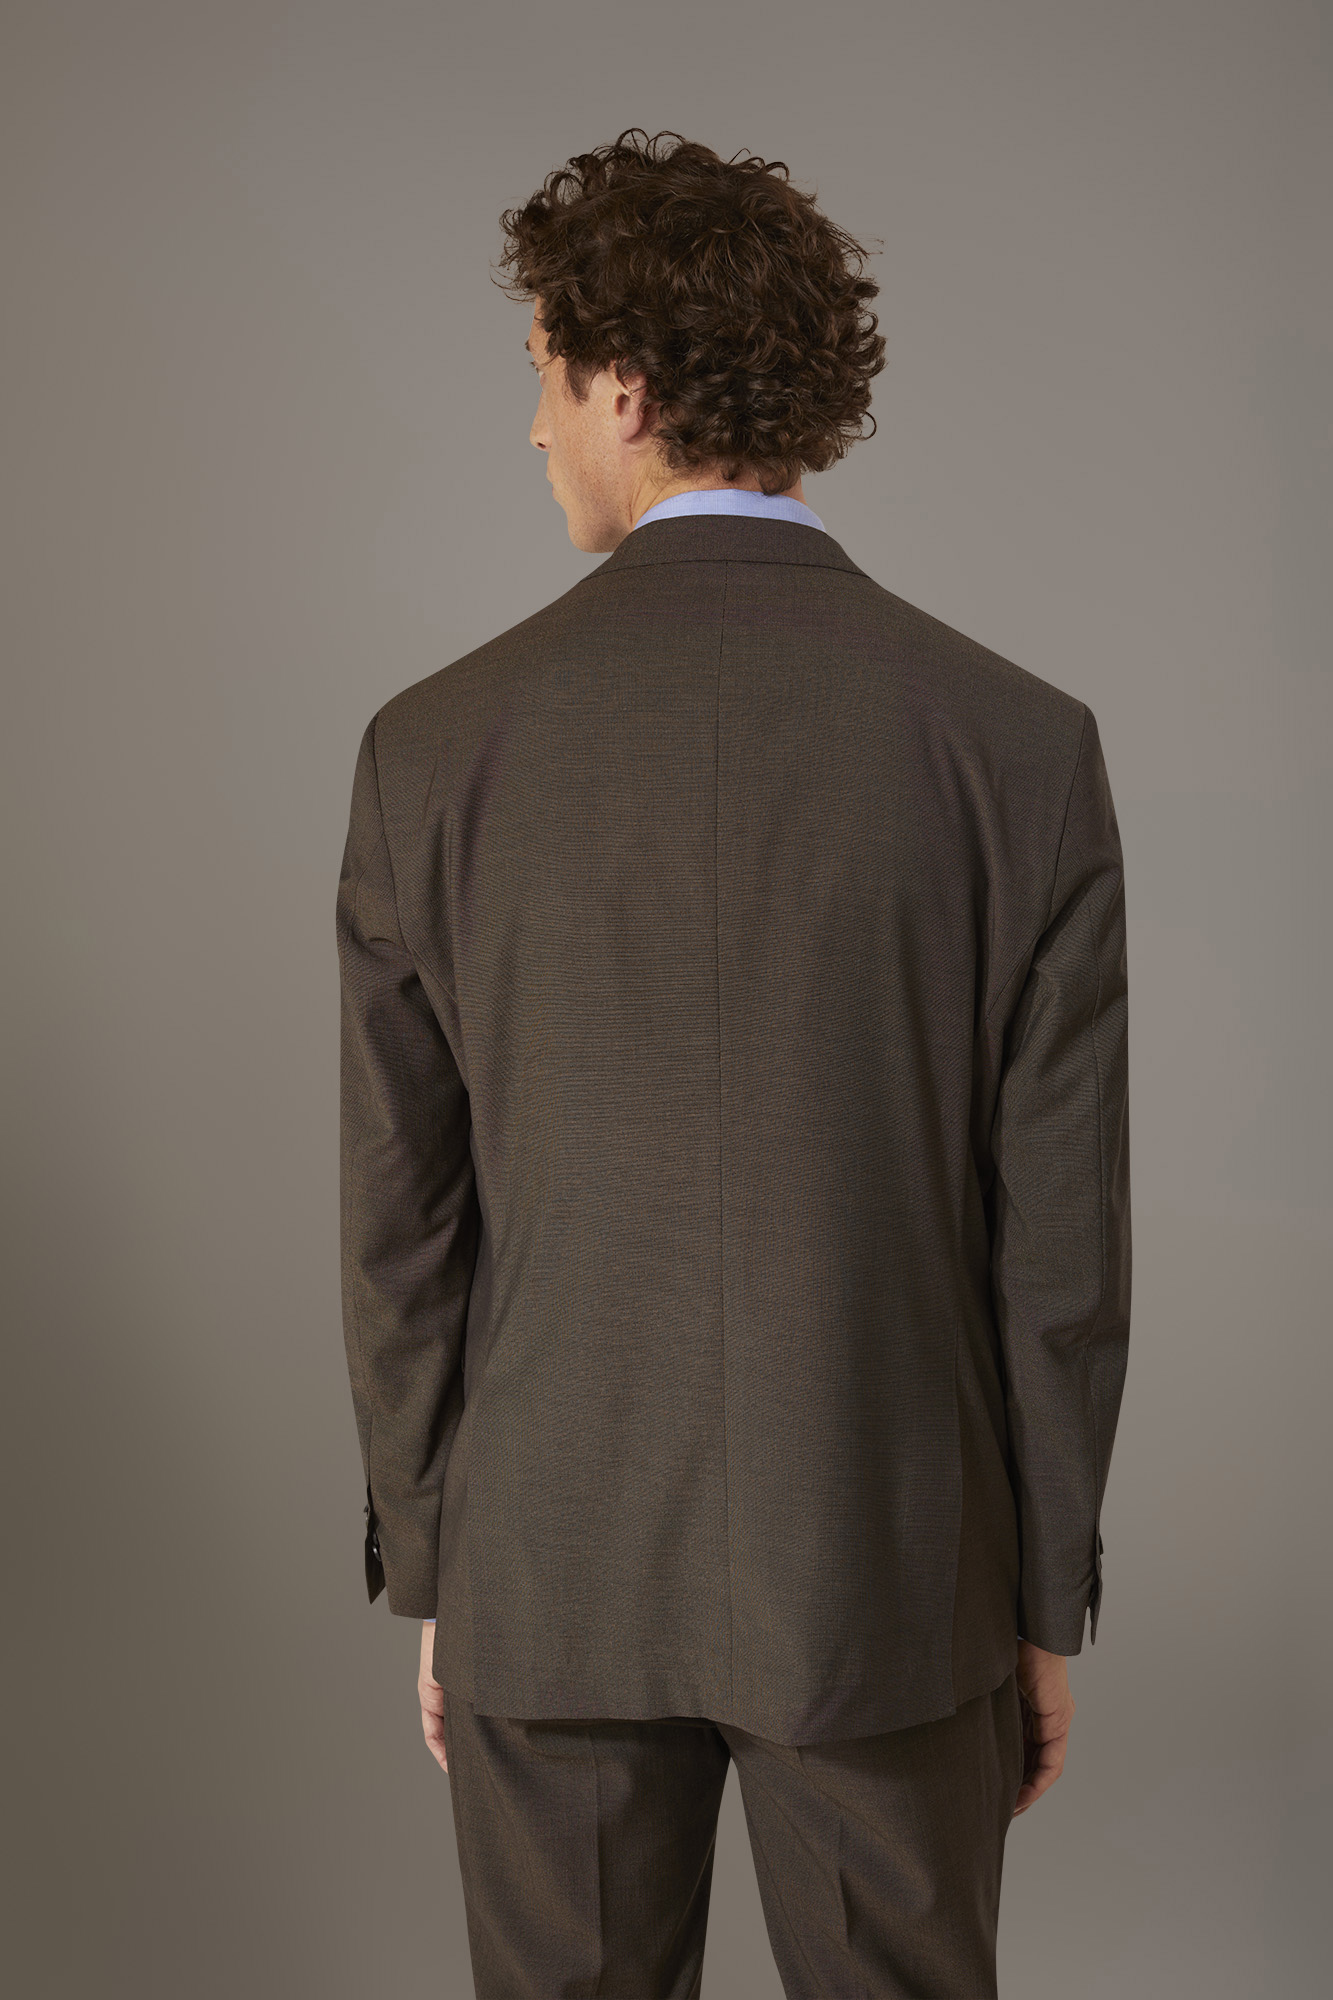 Regular fit single-breasted suit with micro pattern image number null